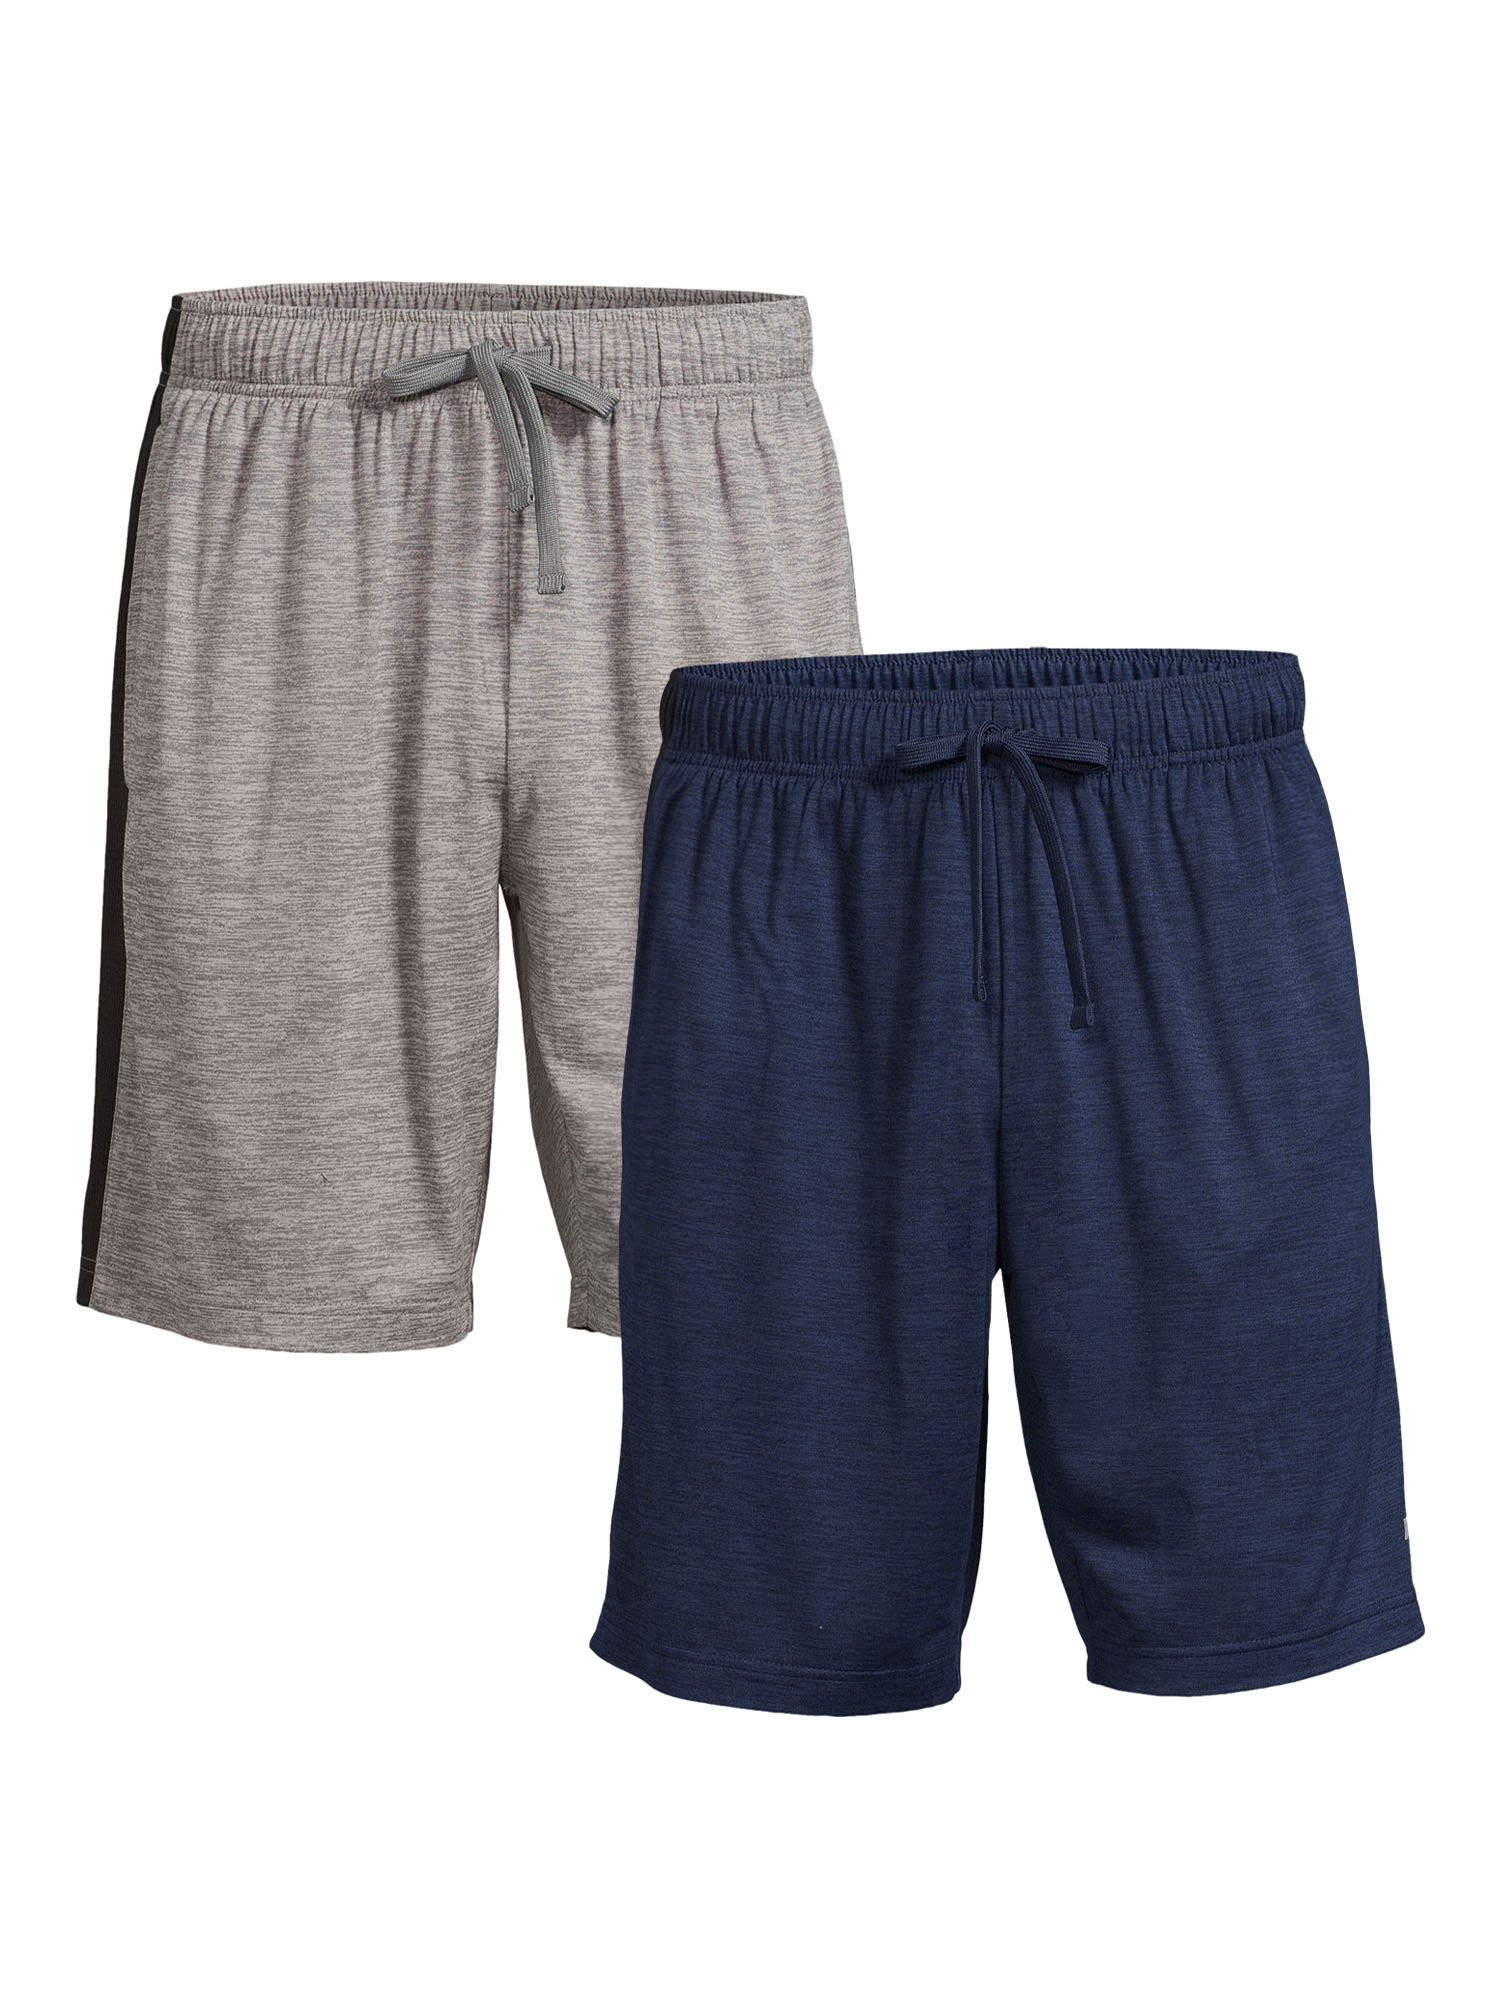 Russell Men's and Big Men's Active Shorts, 2-Pack, up to 5XL - image 1 of 5